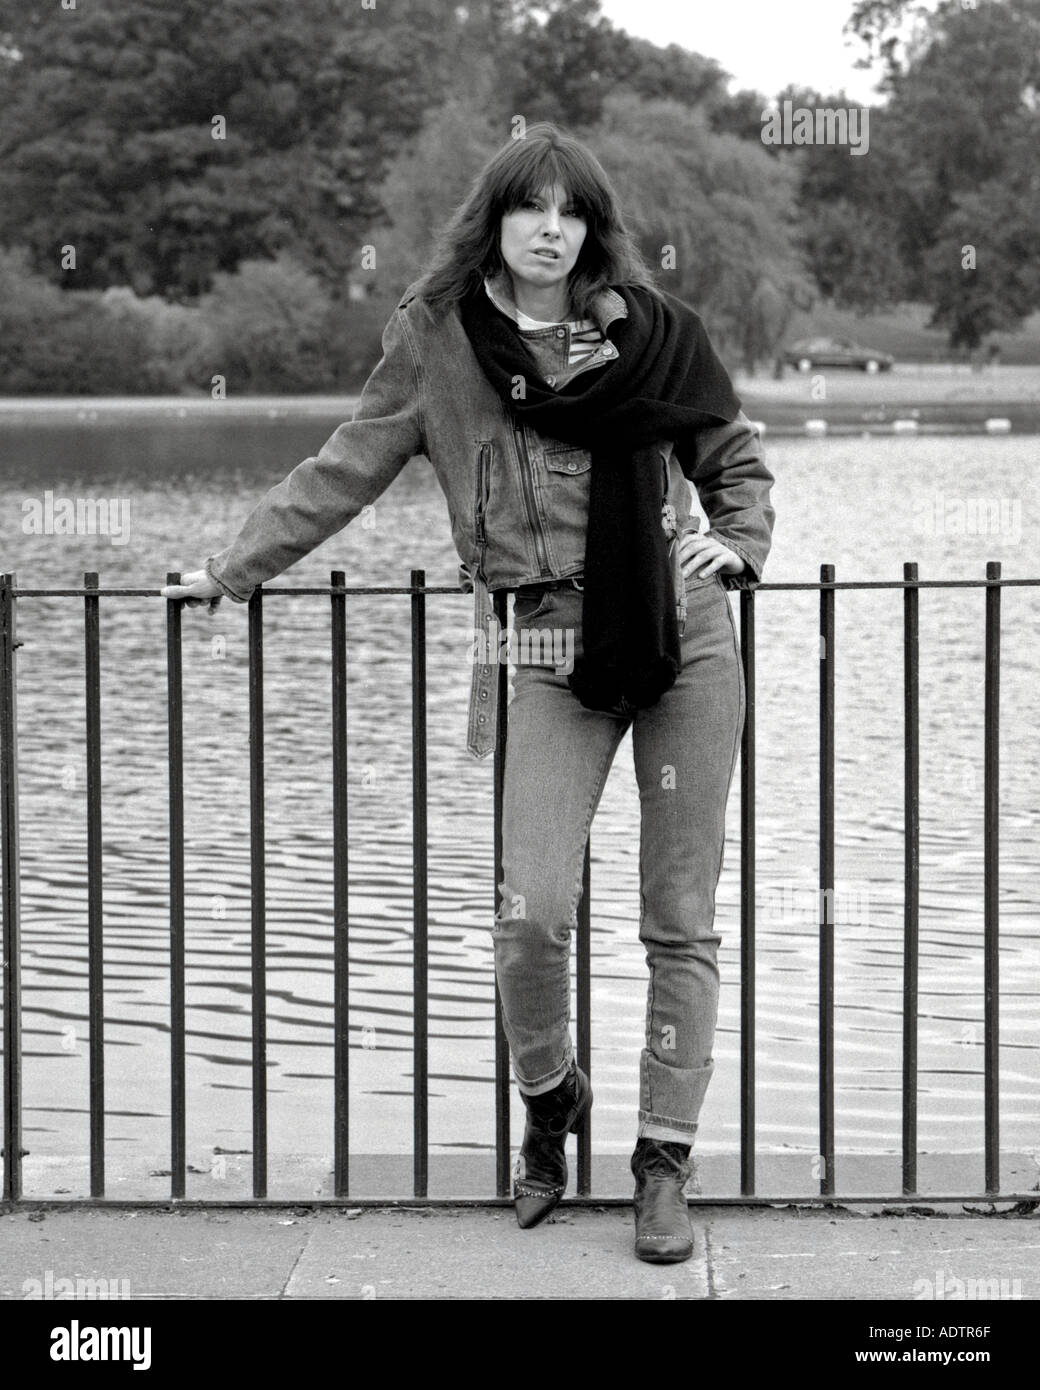 Chrissie Hynde The Pretenders Rock And Roll singer UK British English England Europe vertical Vic Singh Stock Photo